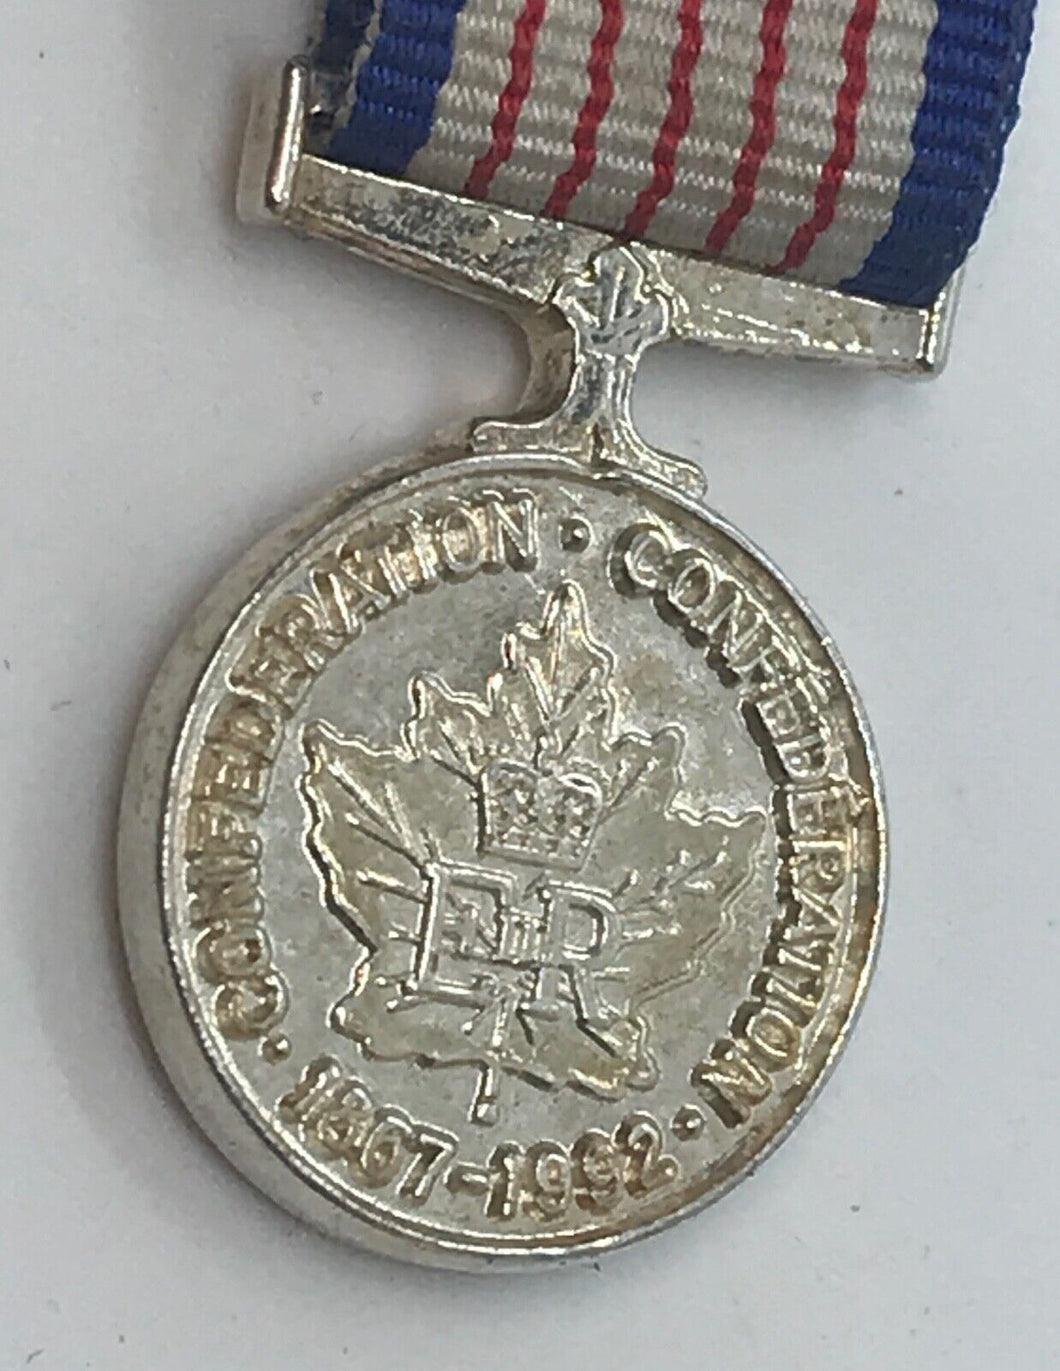 125th Anniversary of the Confederation of Canada miniature dress medal. - - B9